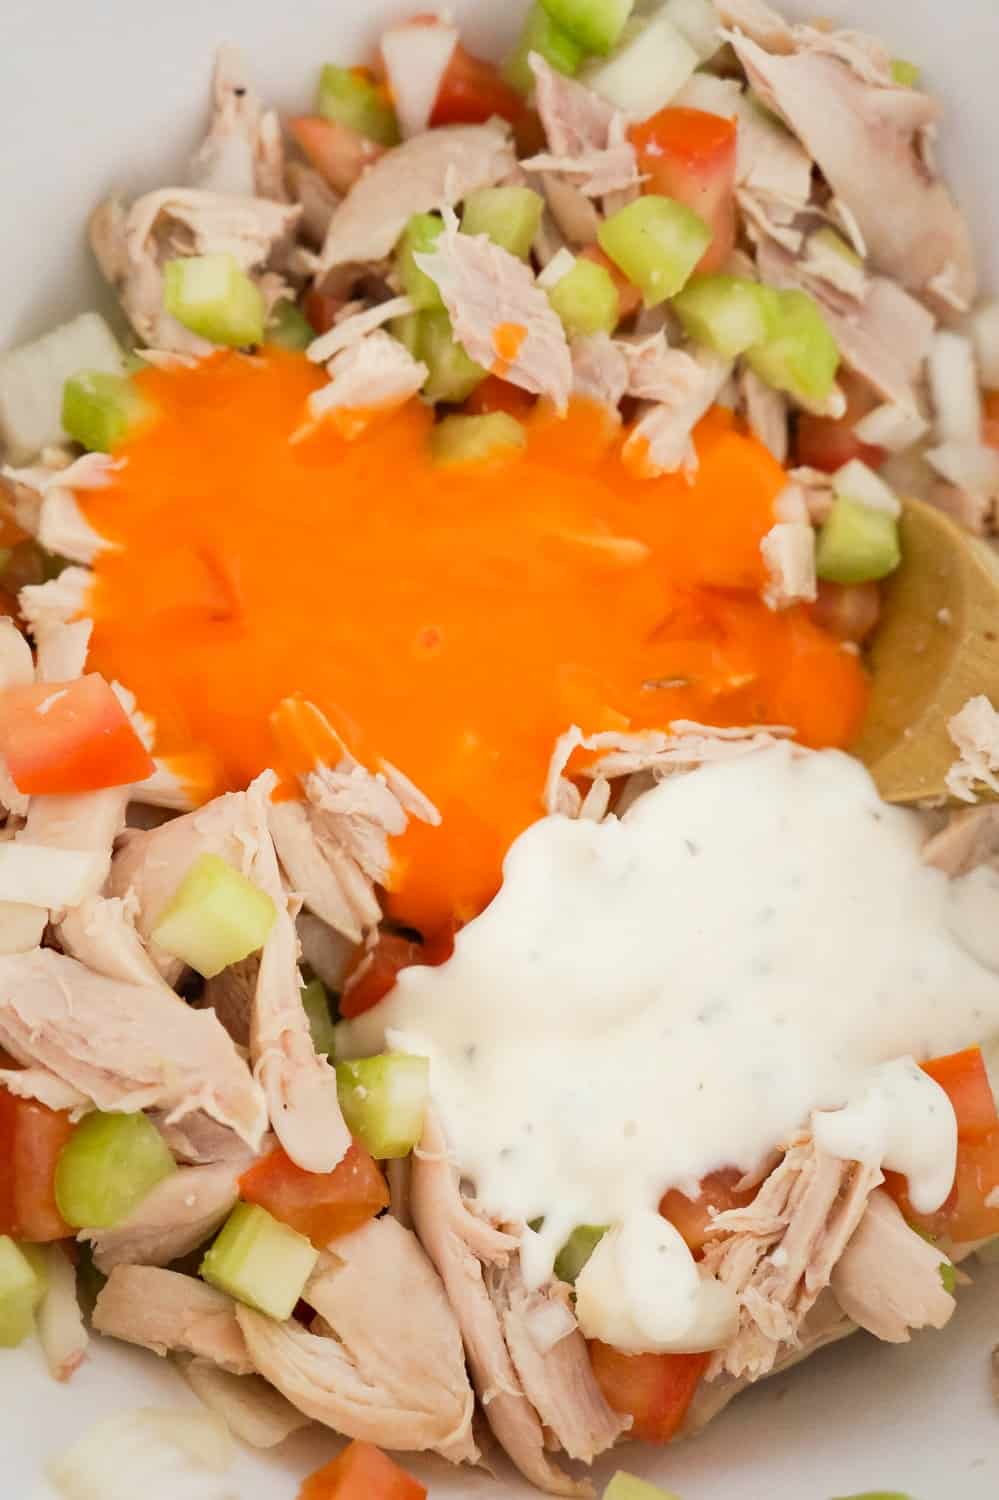 buffalo sauce and ranch dressing on top of shredded chicken and diced vegetables in a mixing bowl